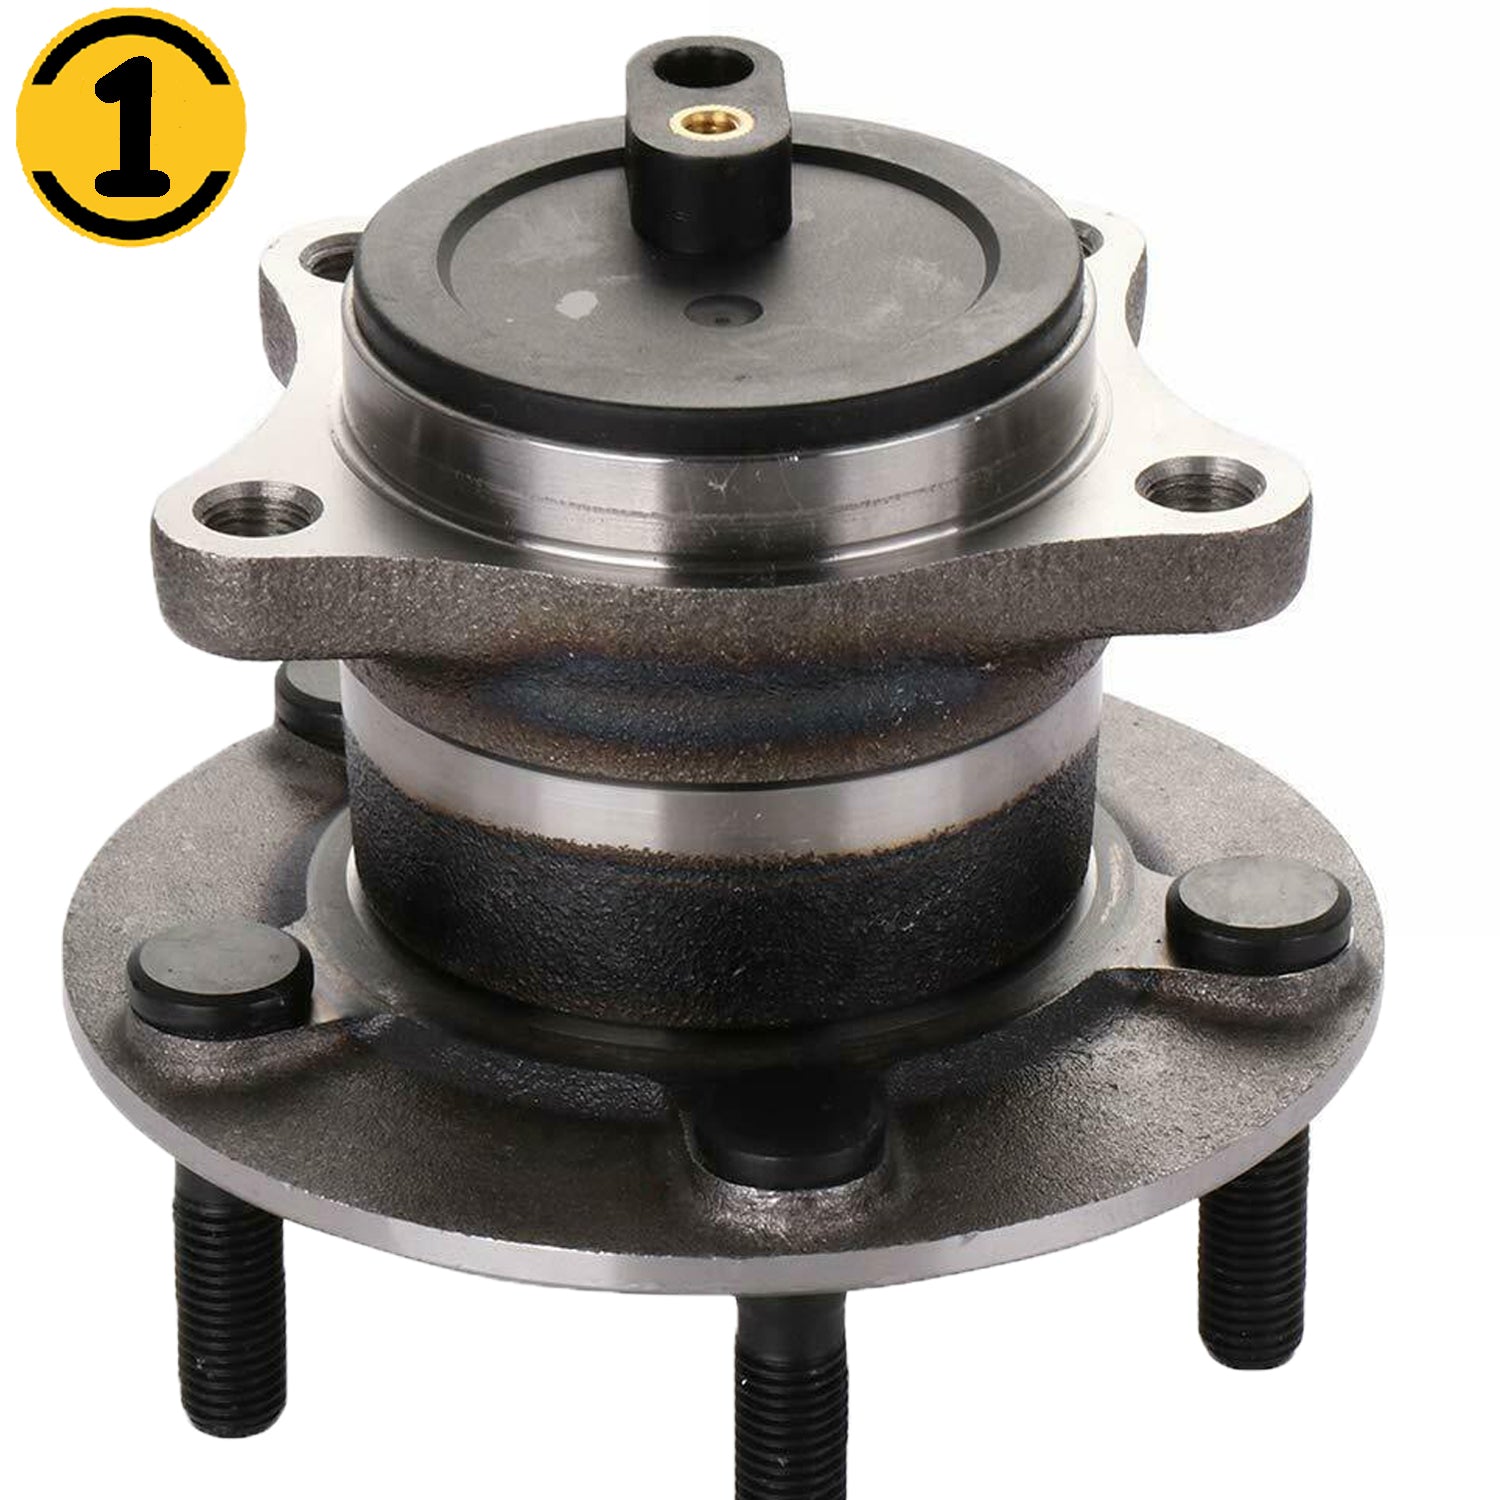 JADODE 512409 Rear Wheel Hub Bearing Assembly Replacement for Mazda 6 Hub Bearing OE Directly 5 Lugs w/ABS FWD